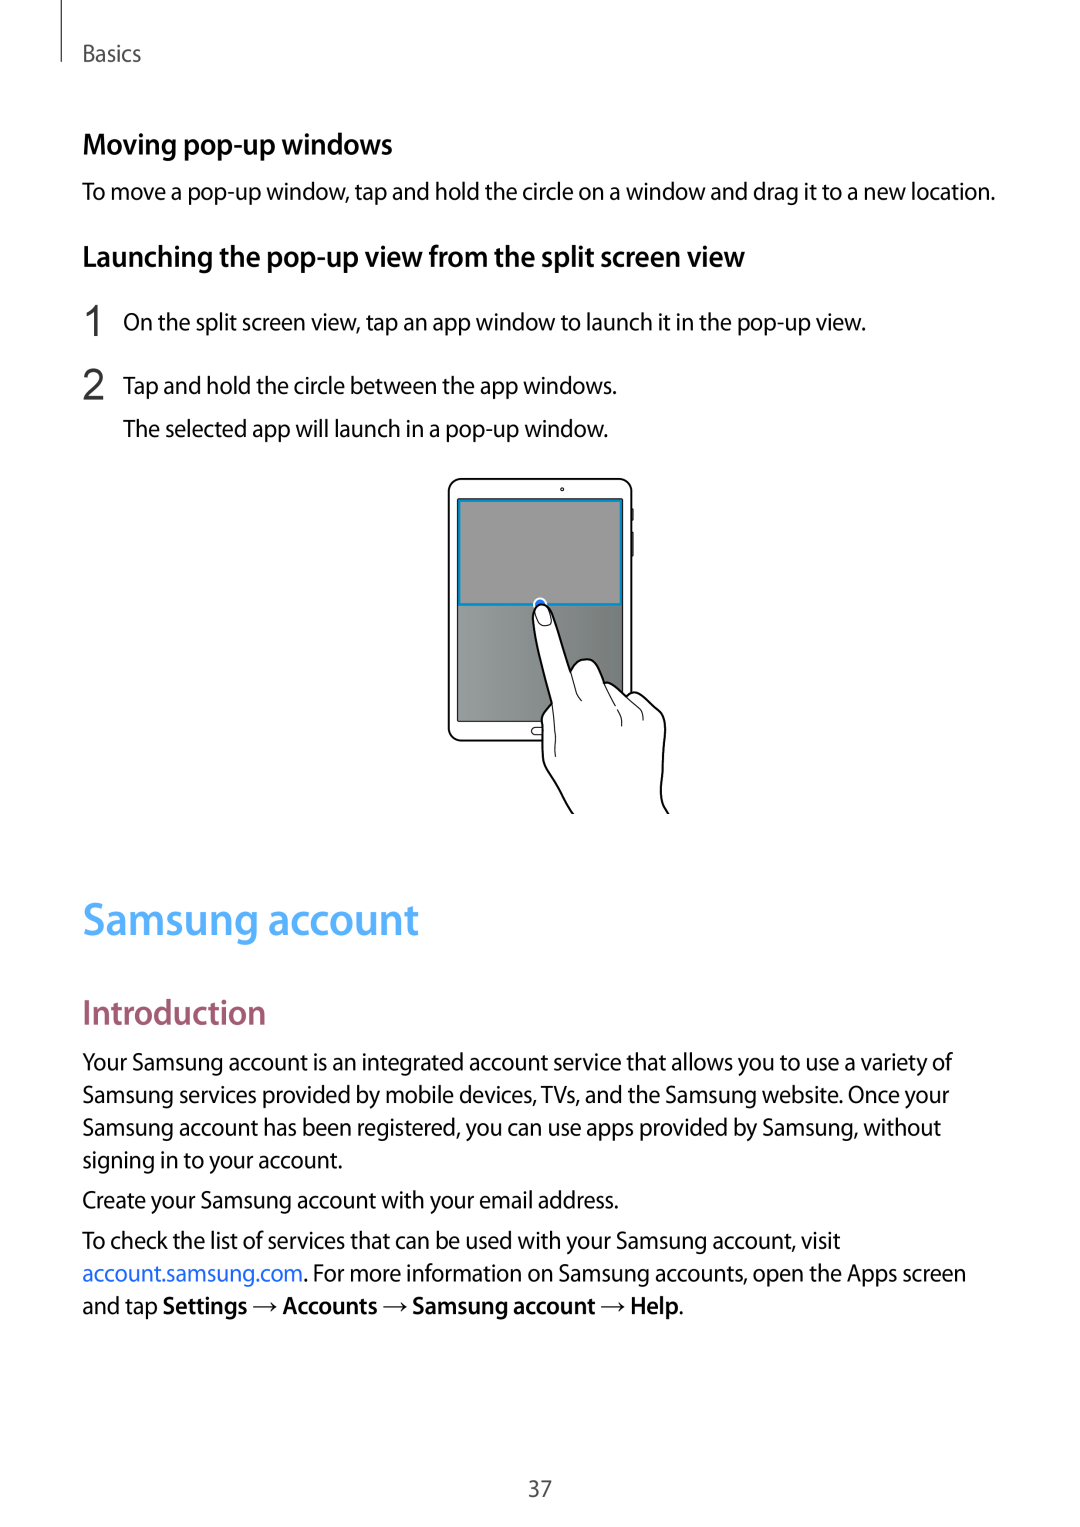 Samsung SM-T819NZWEEUR manual Samsung account, Moving pop-up windows, Launching the pop-up view from the split screen view 